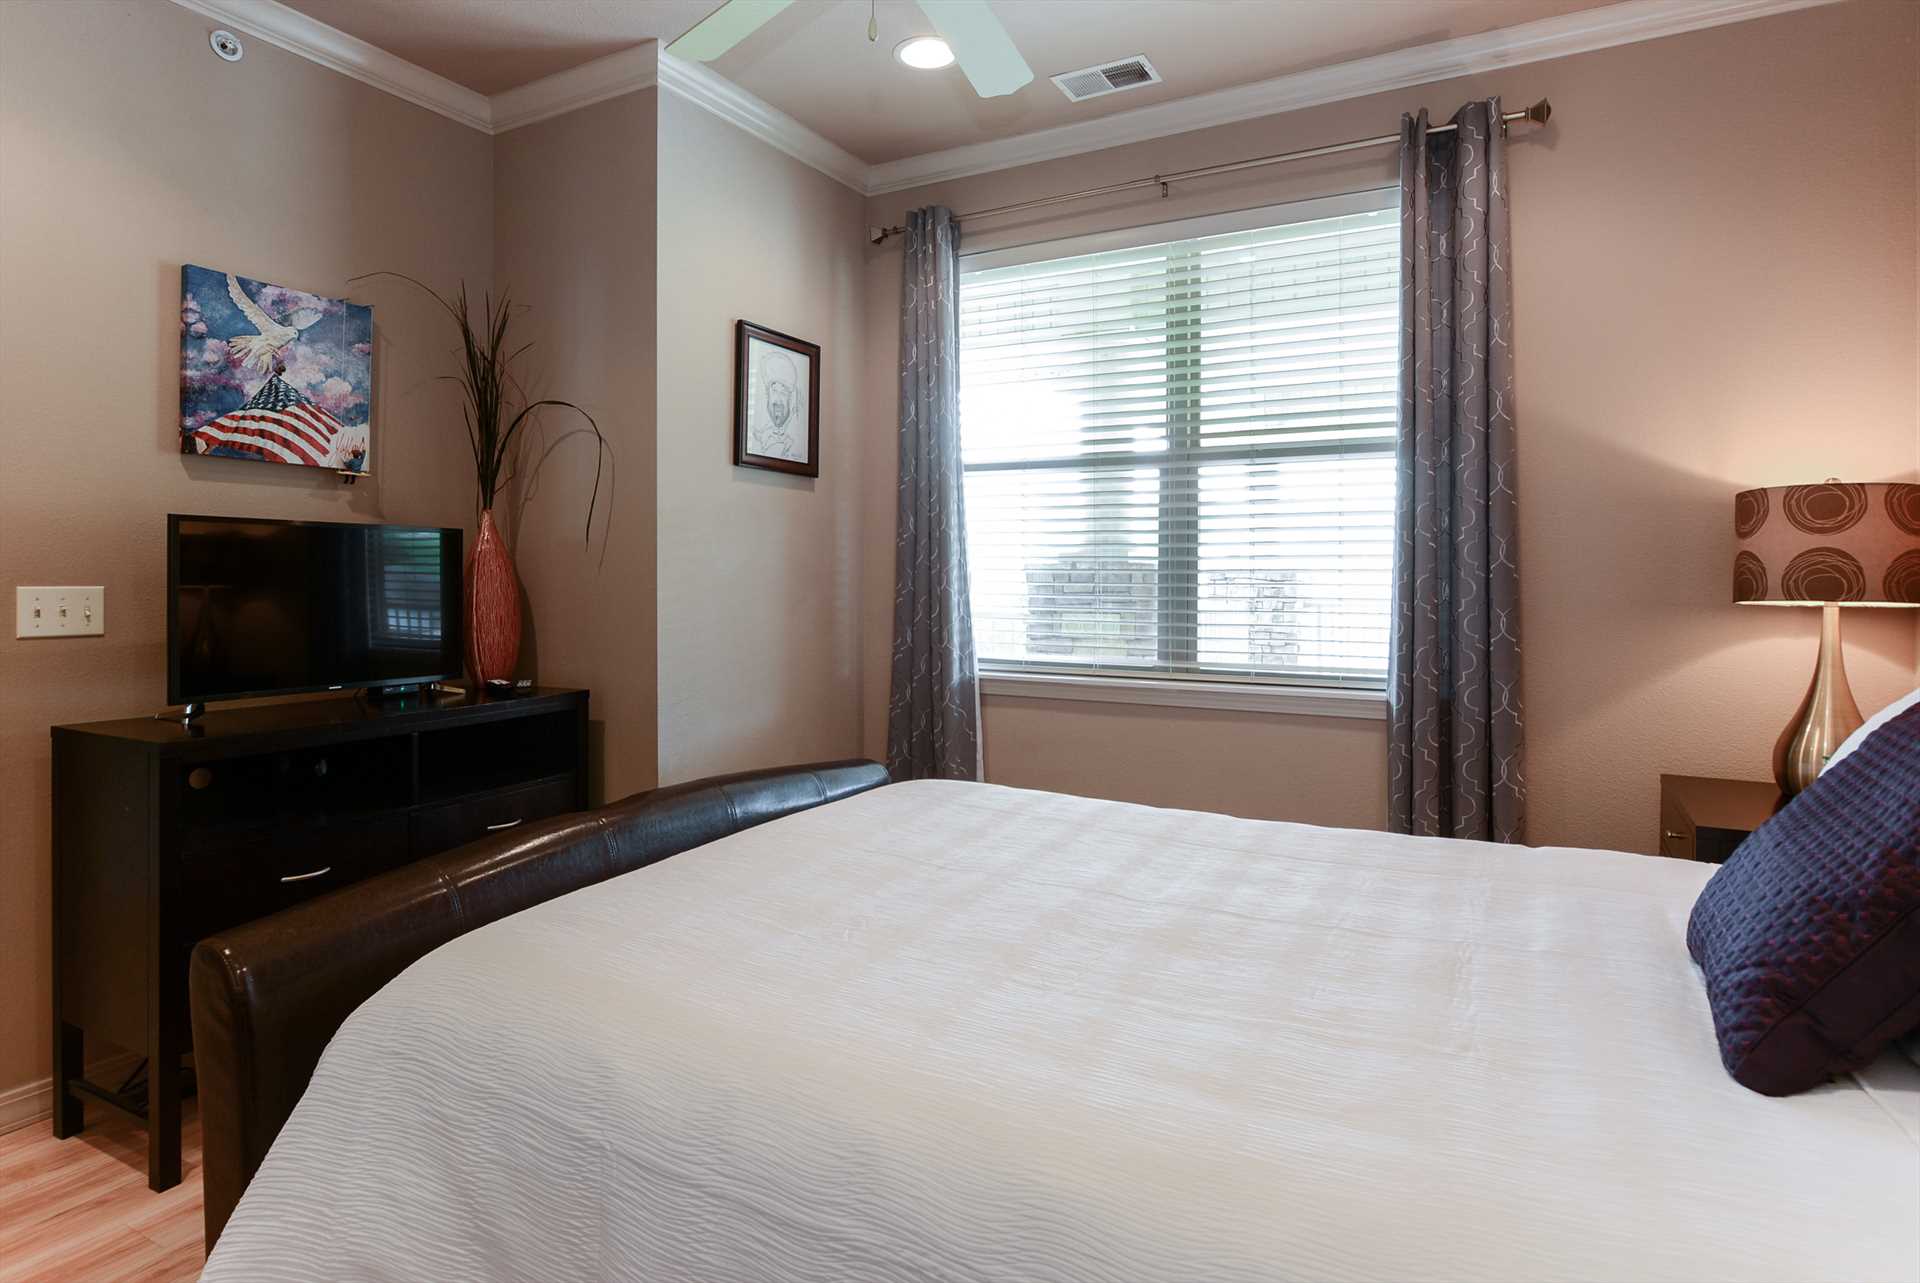 All bedrooms include flat screen televisions.